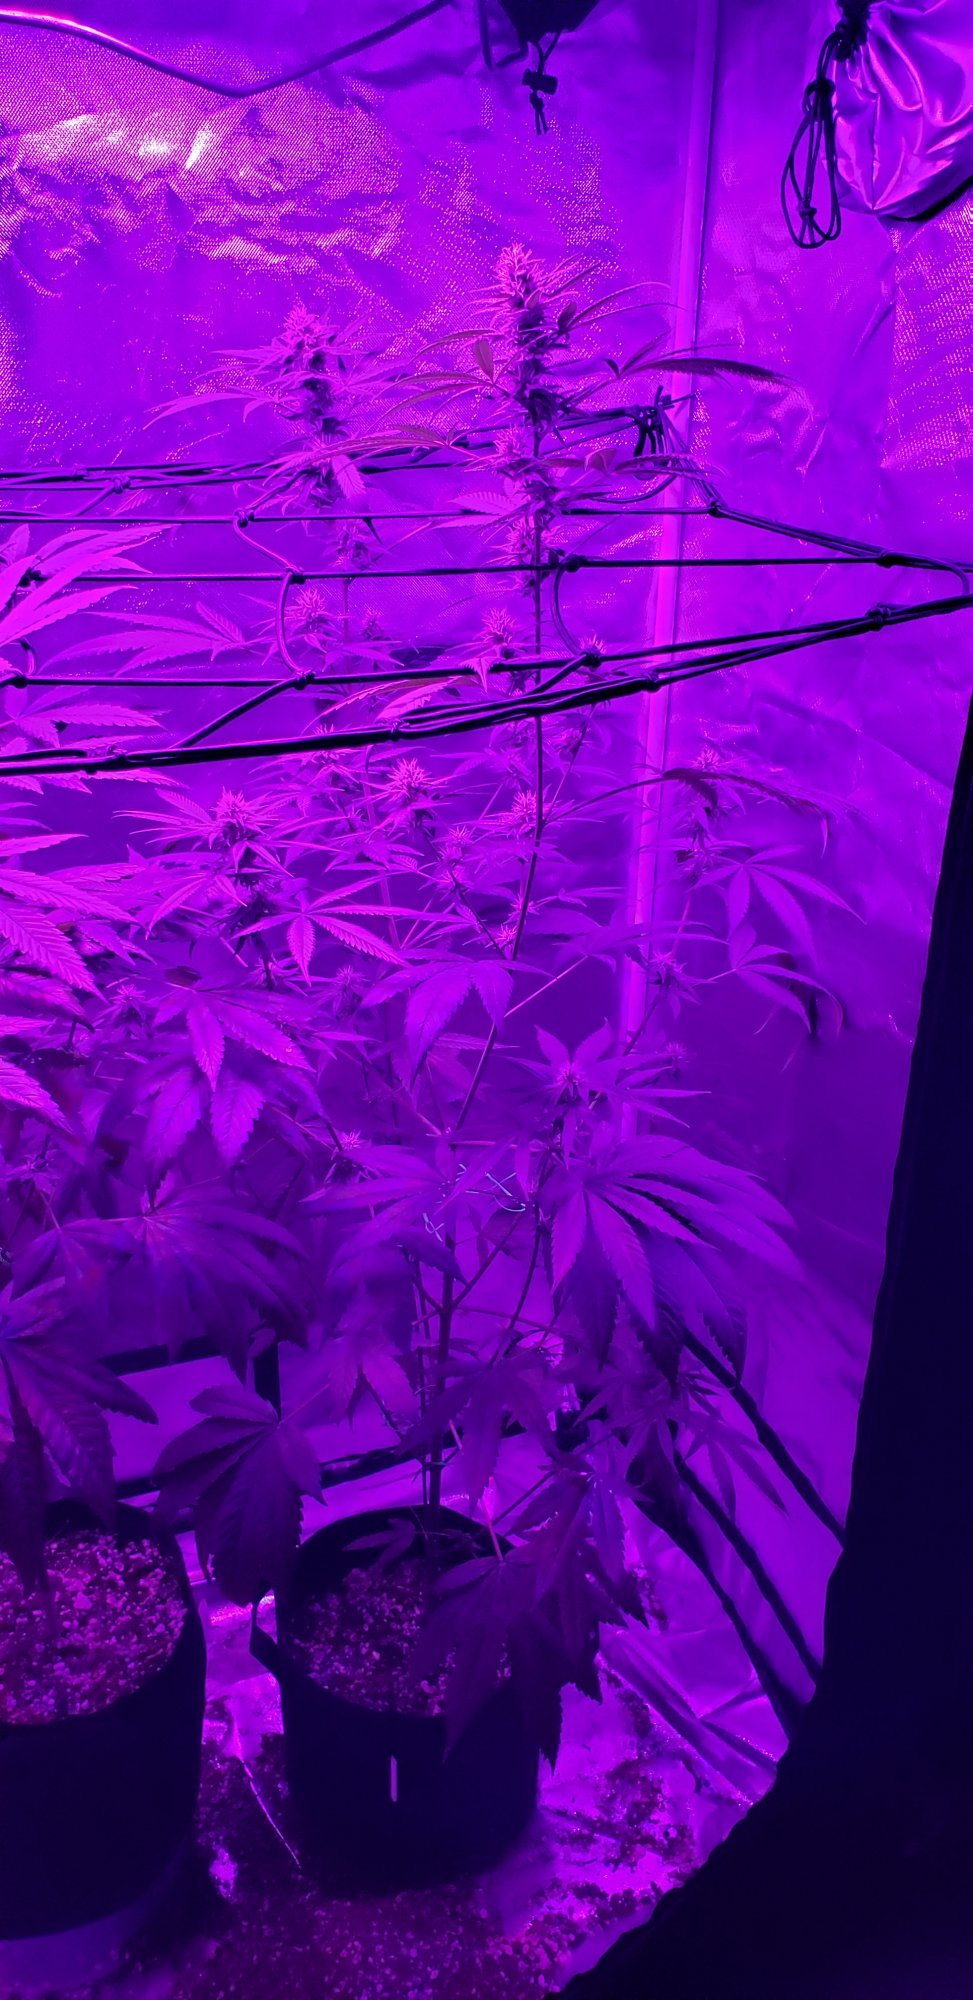 New to growing 5